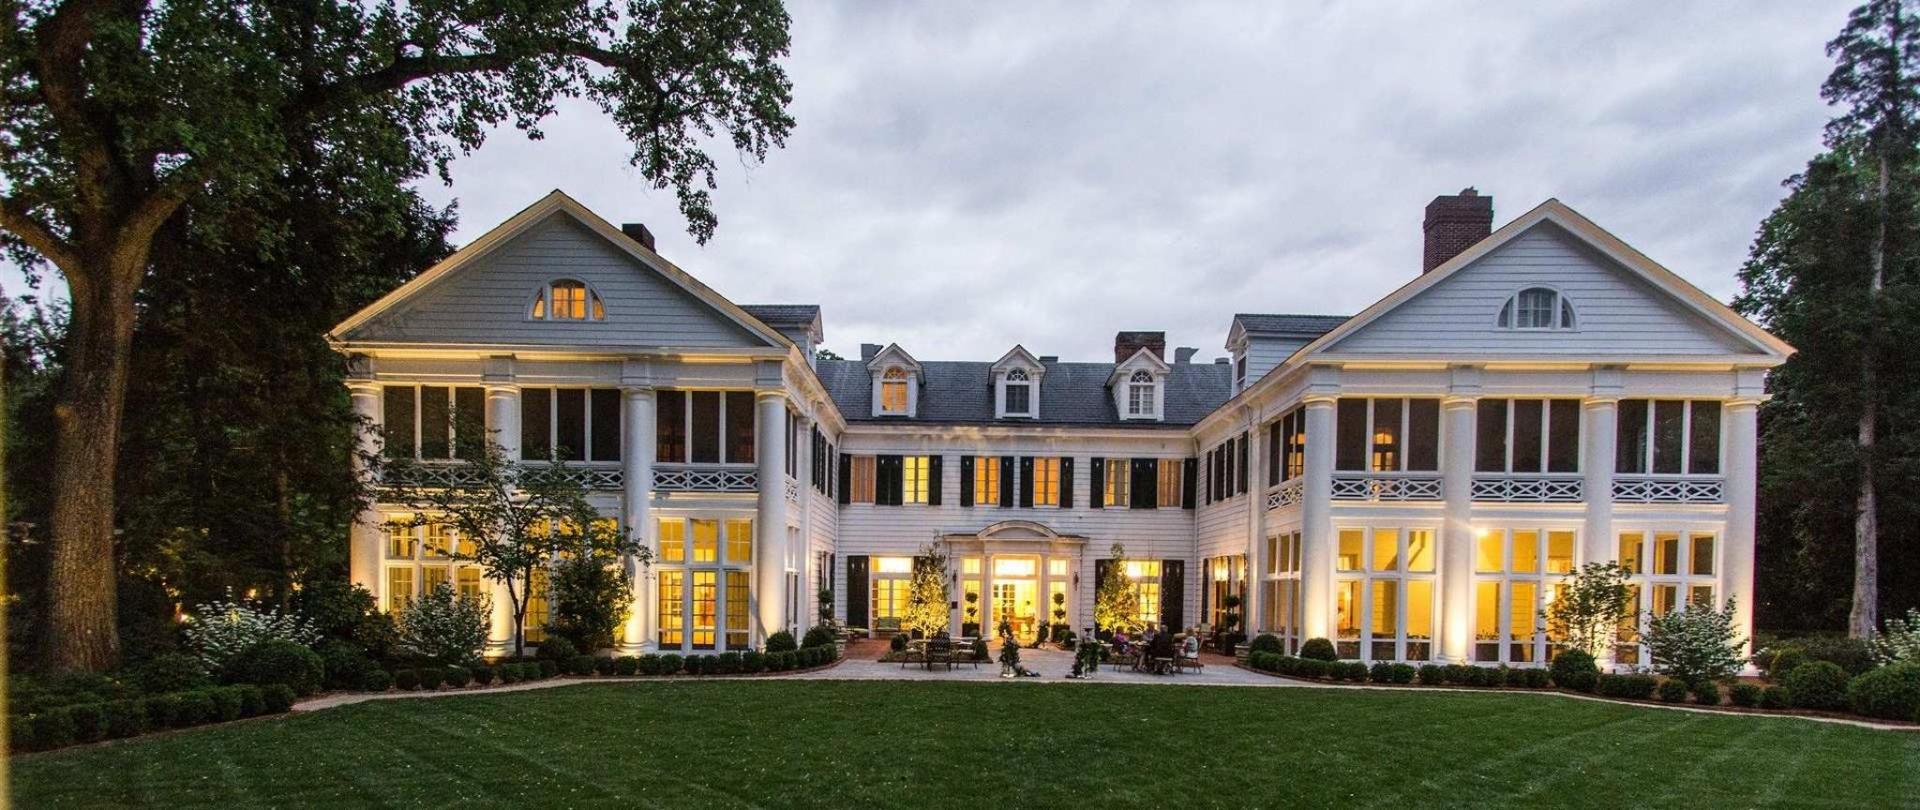 The Duke Mansion Bed And Breakfast In Charlotte Nc